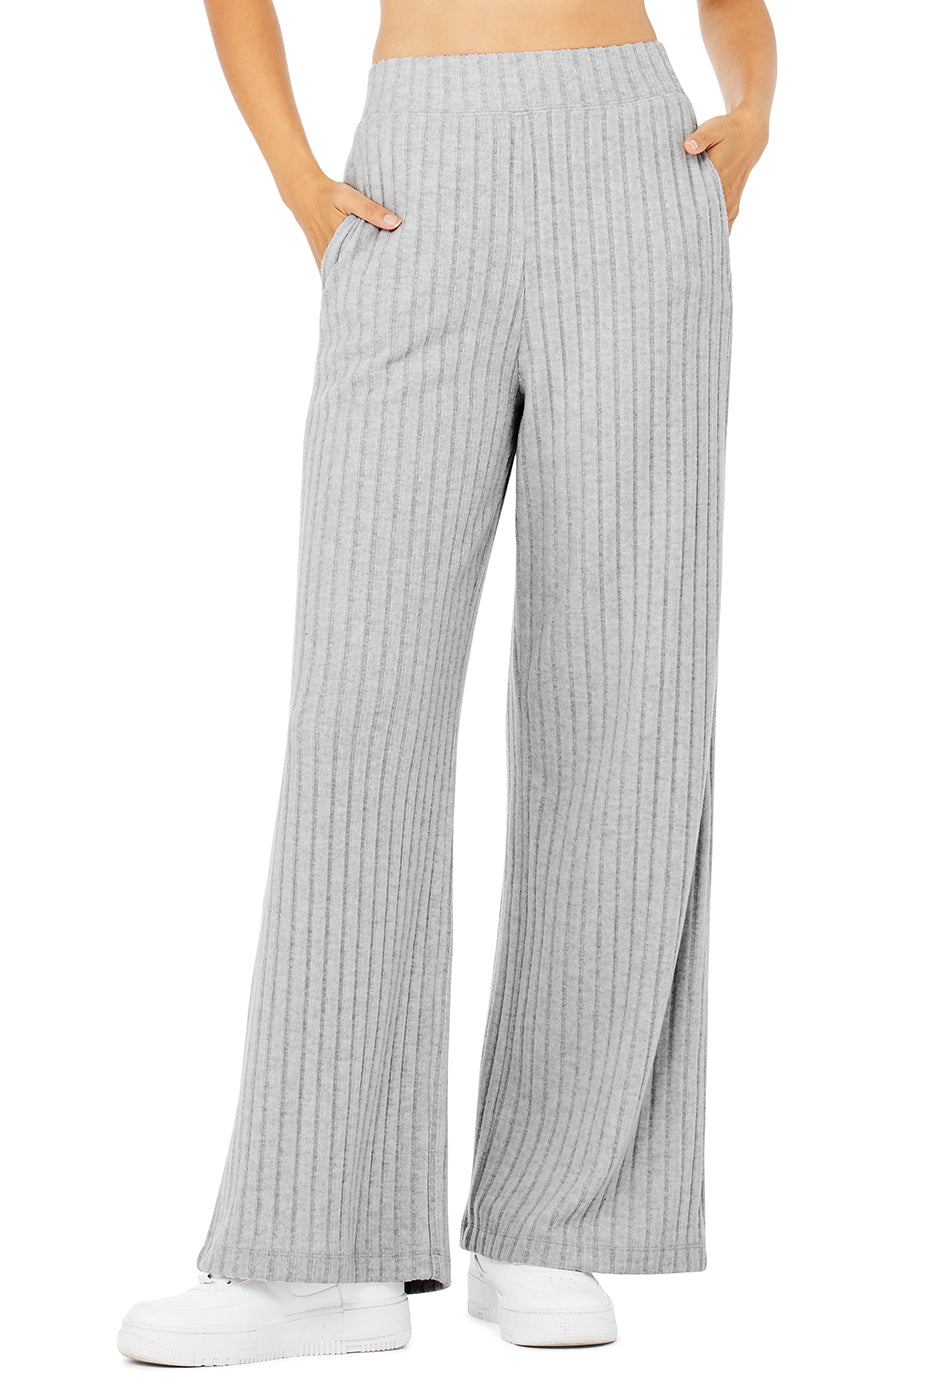 Ribbed Take Comfort Wide Leg Pants in Athletic Heather Grey by Alo